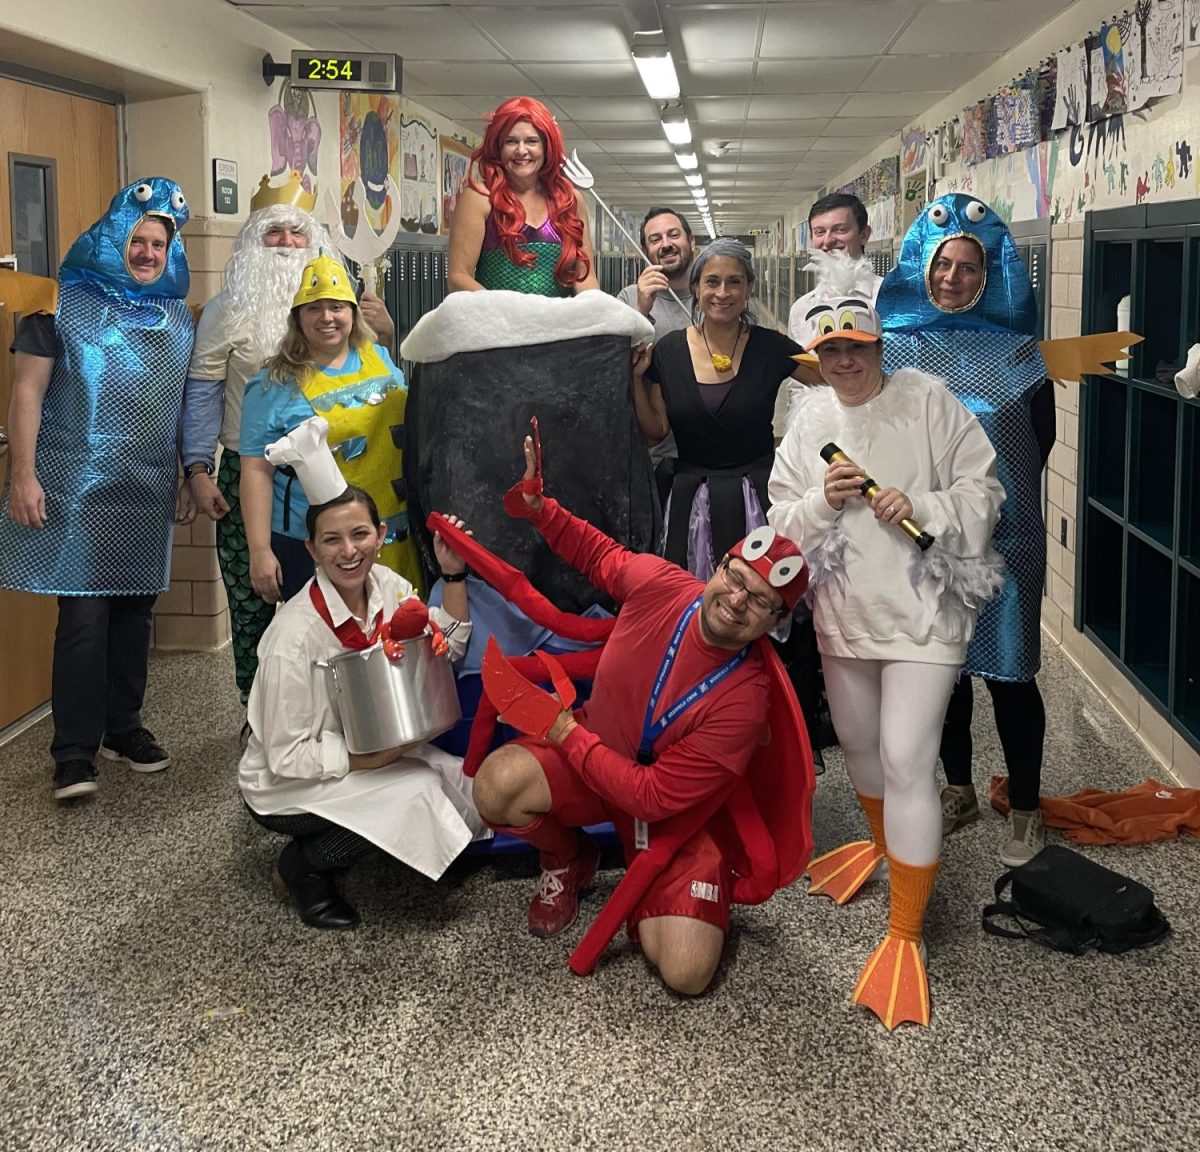 The fine arts department wins with The Little Mermaid.